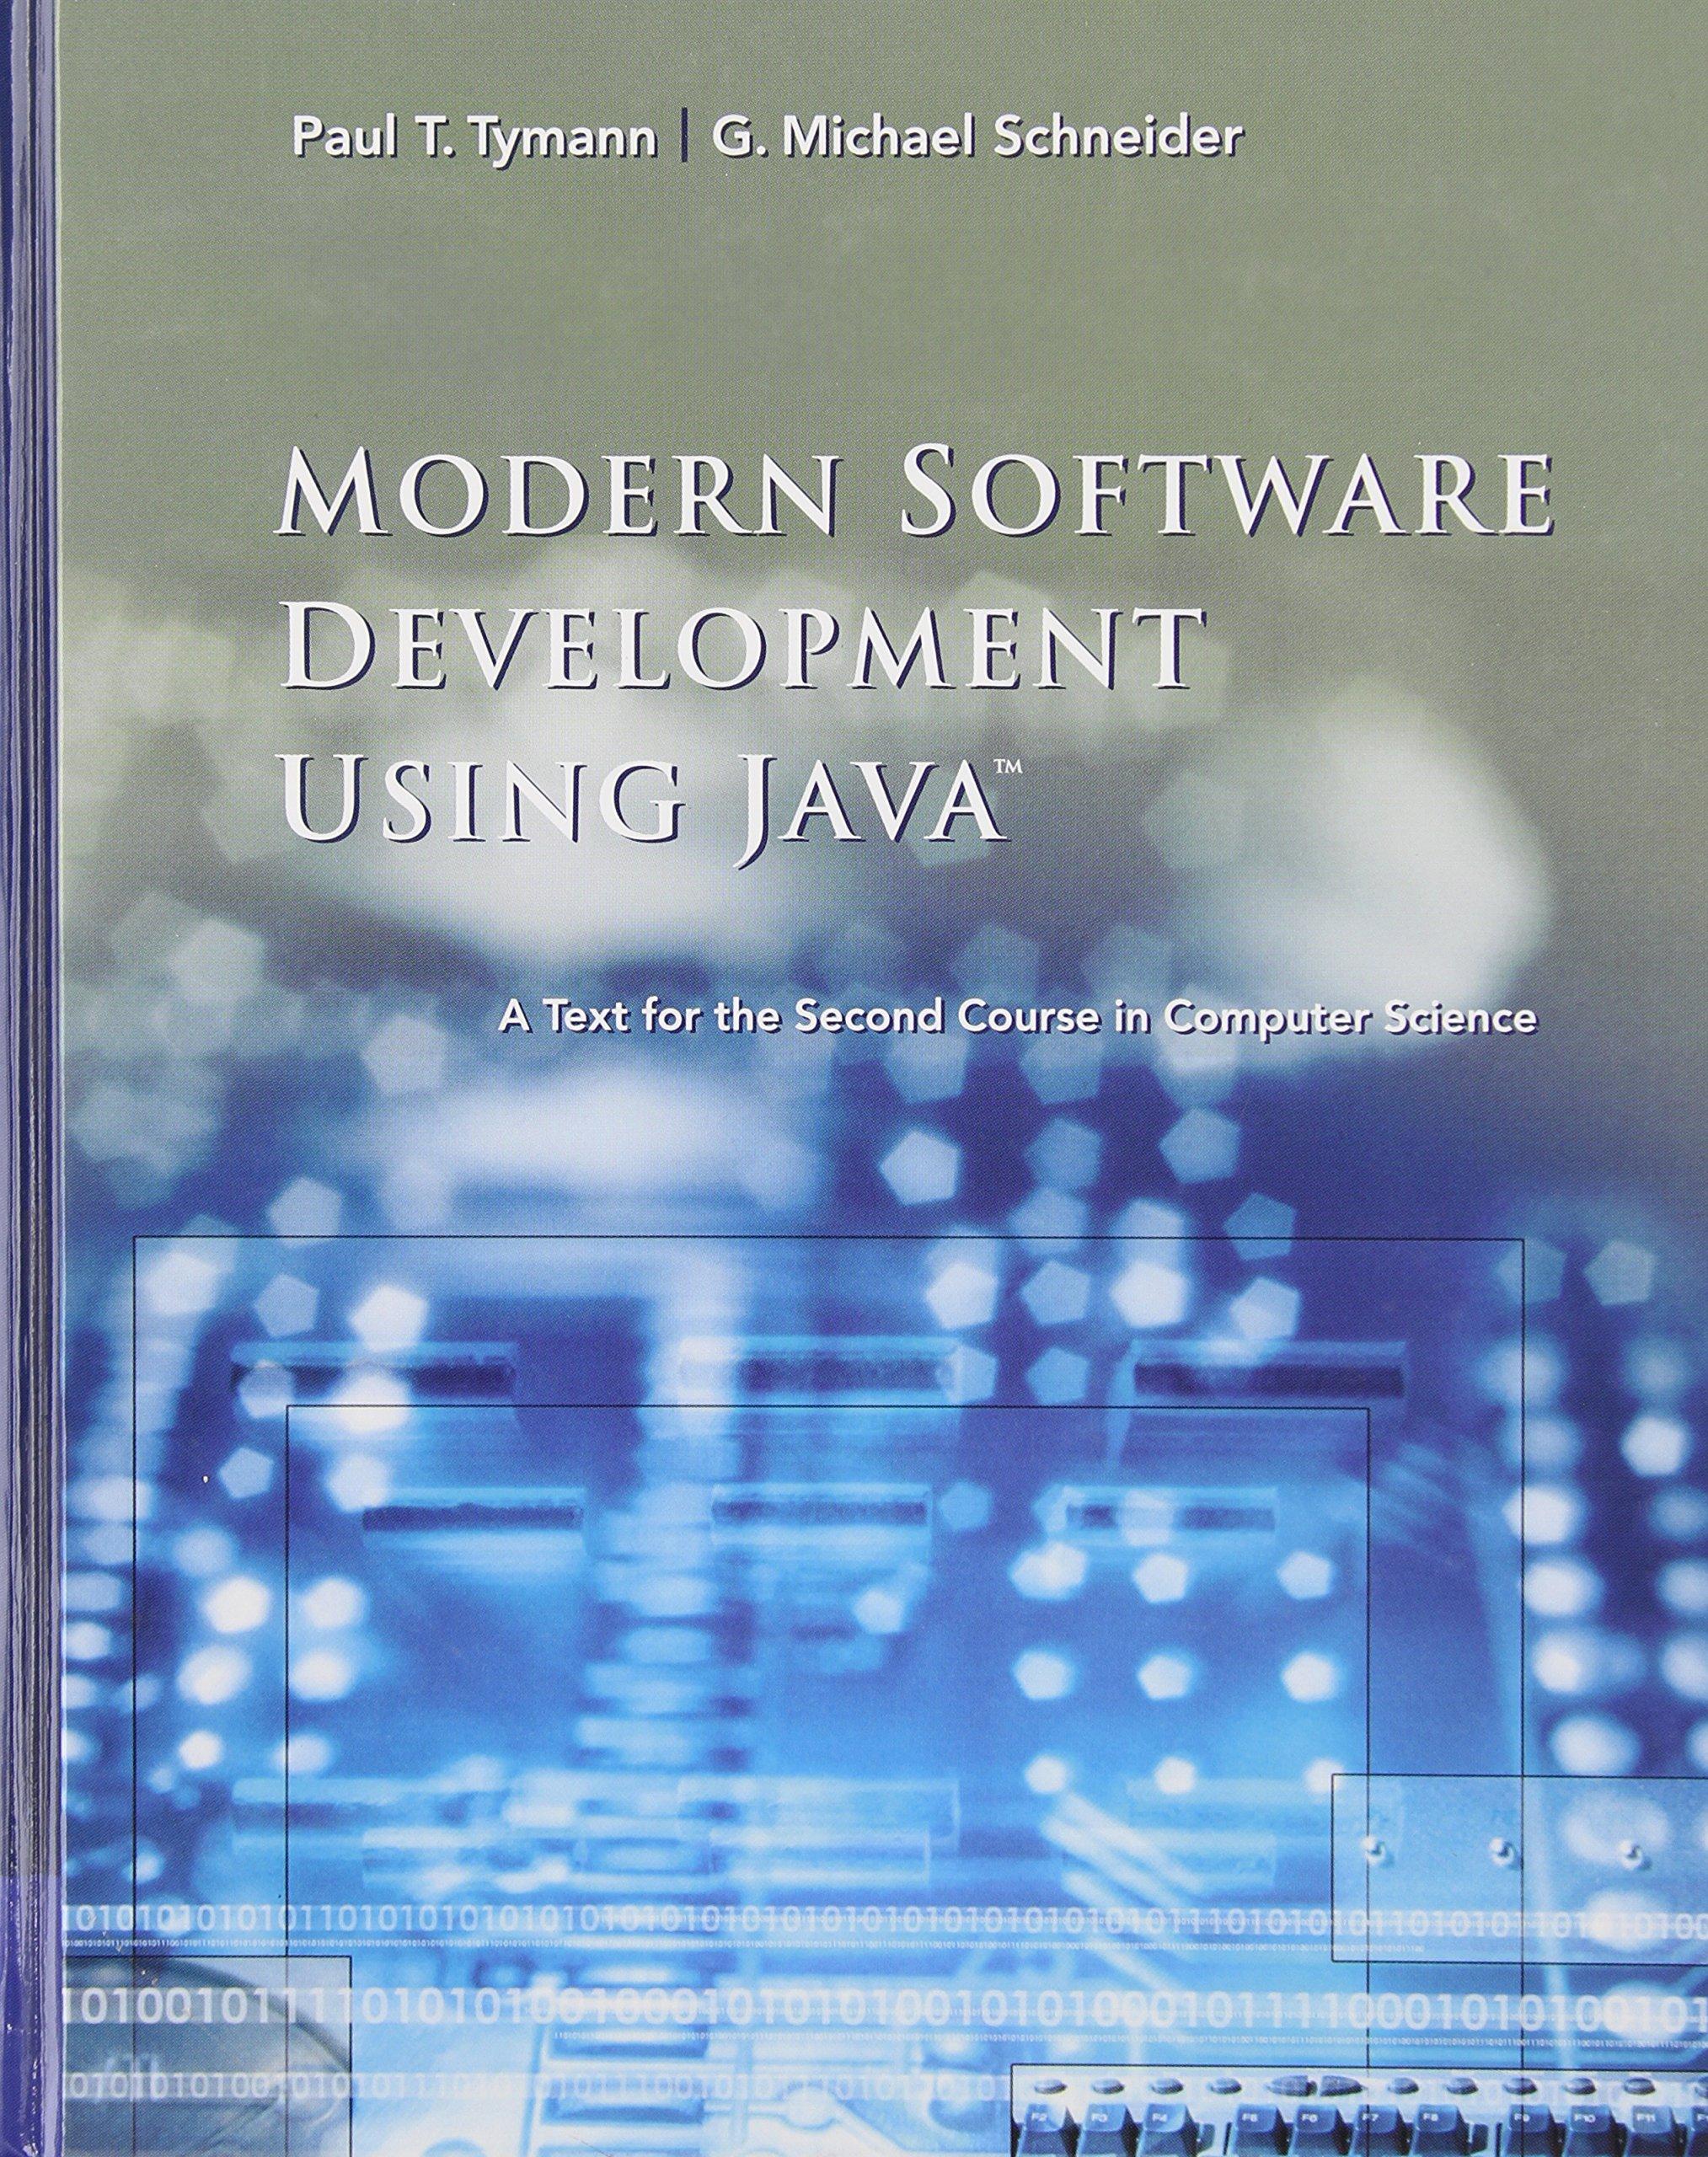 modern software development using java a text for the second course in computer science 1st edition paul t.